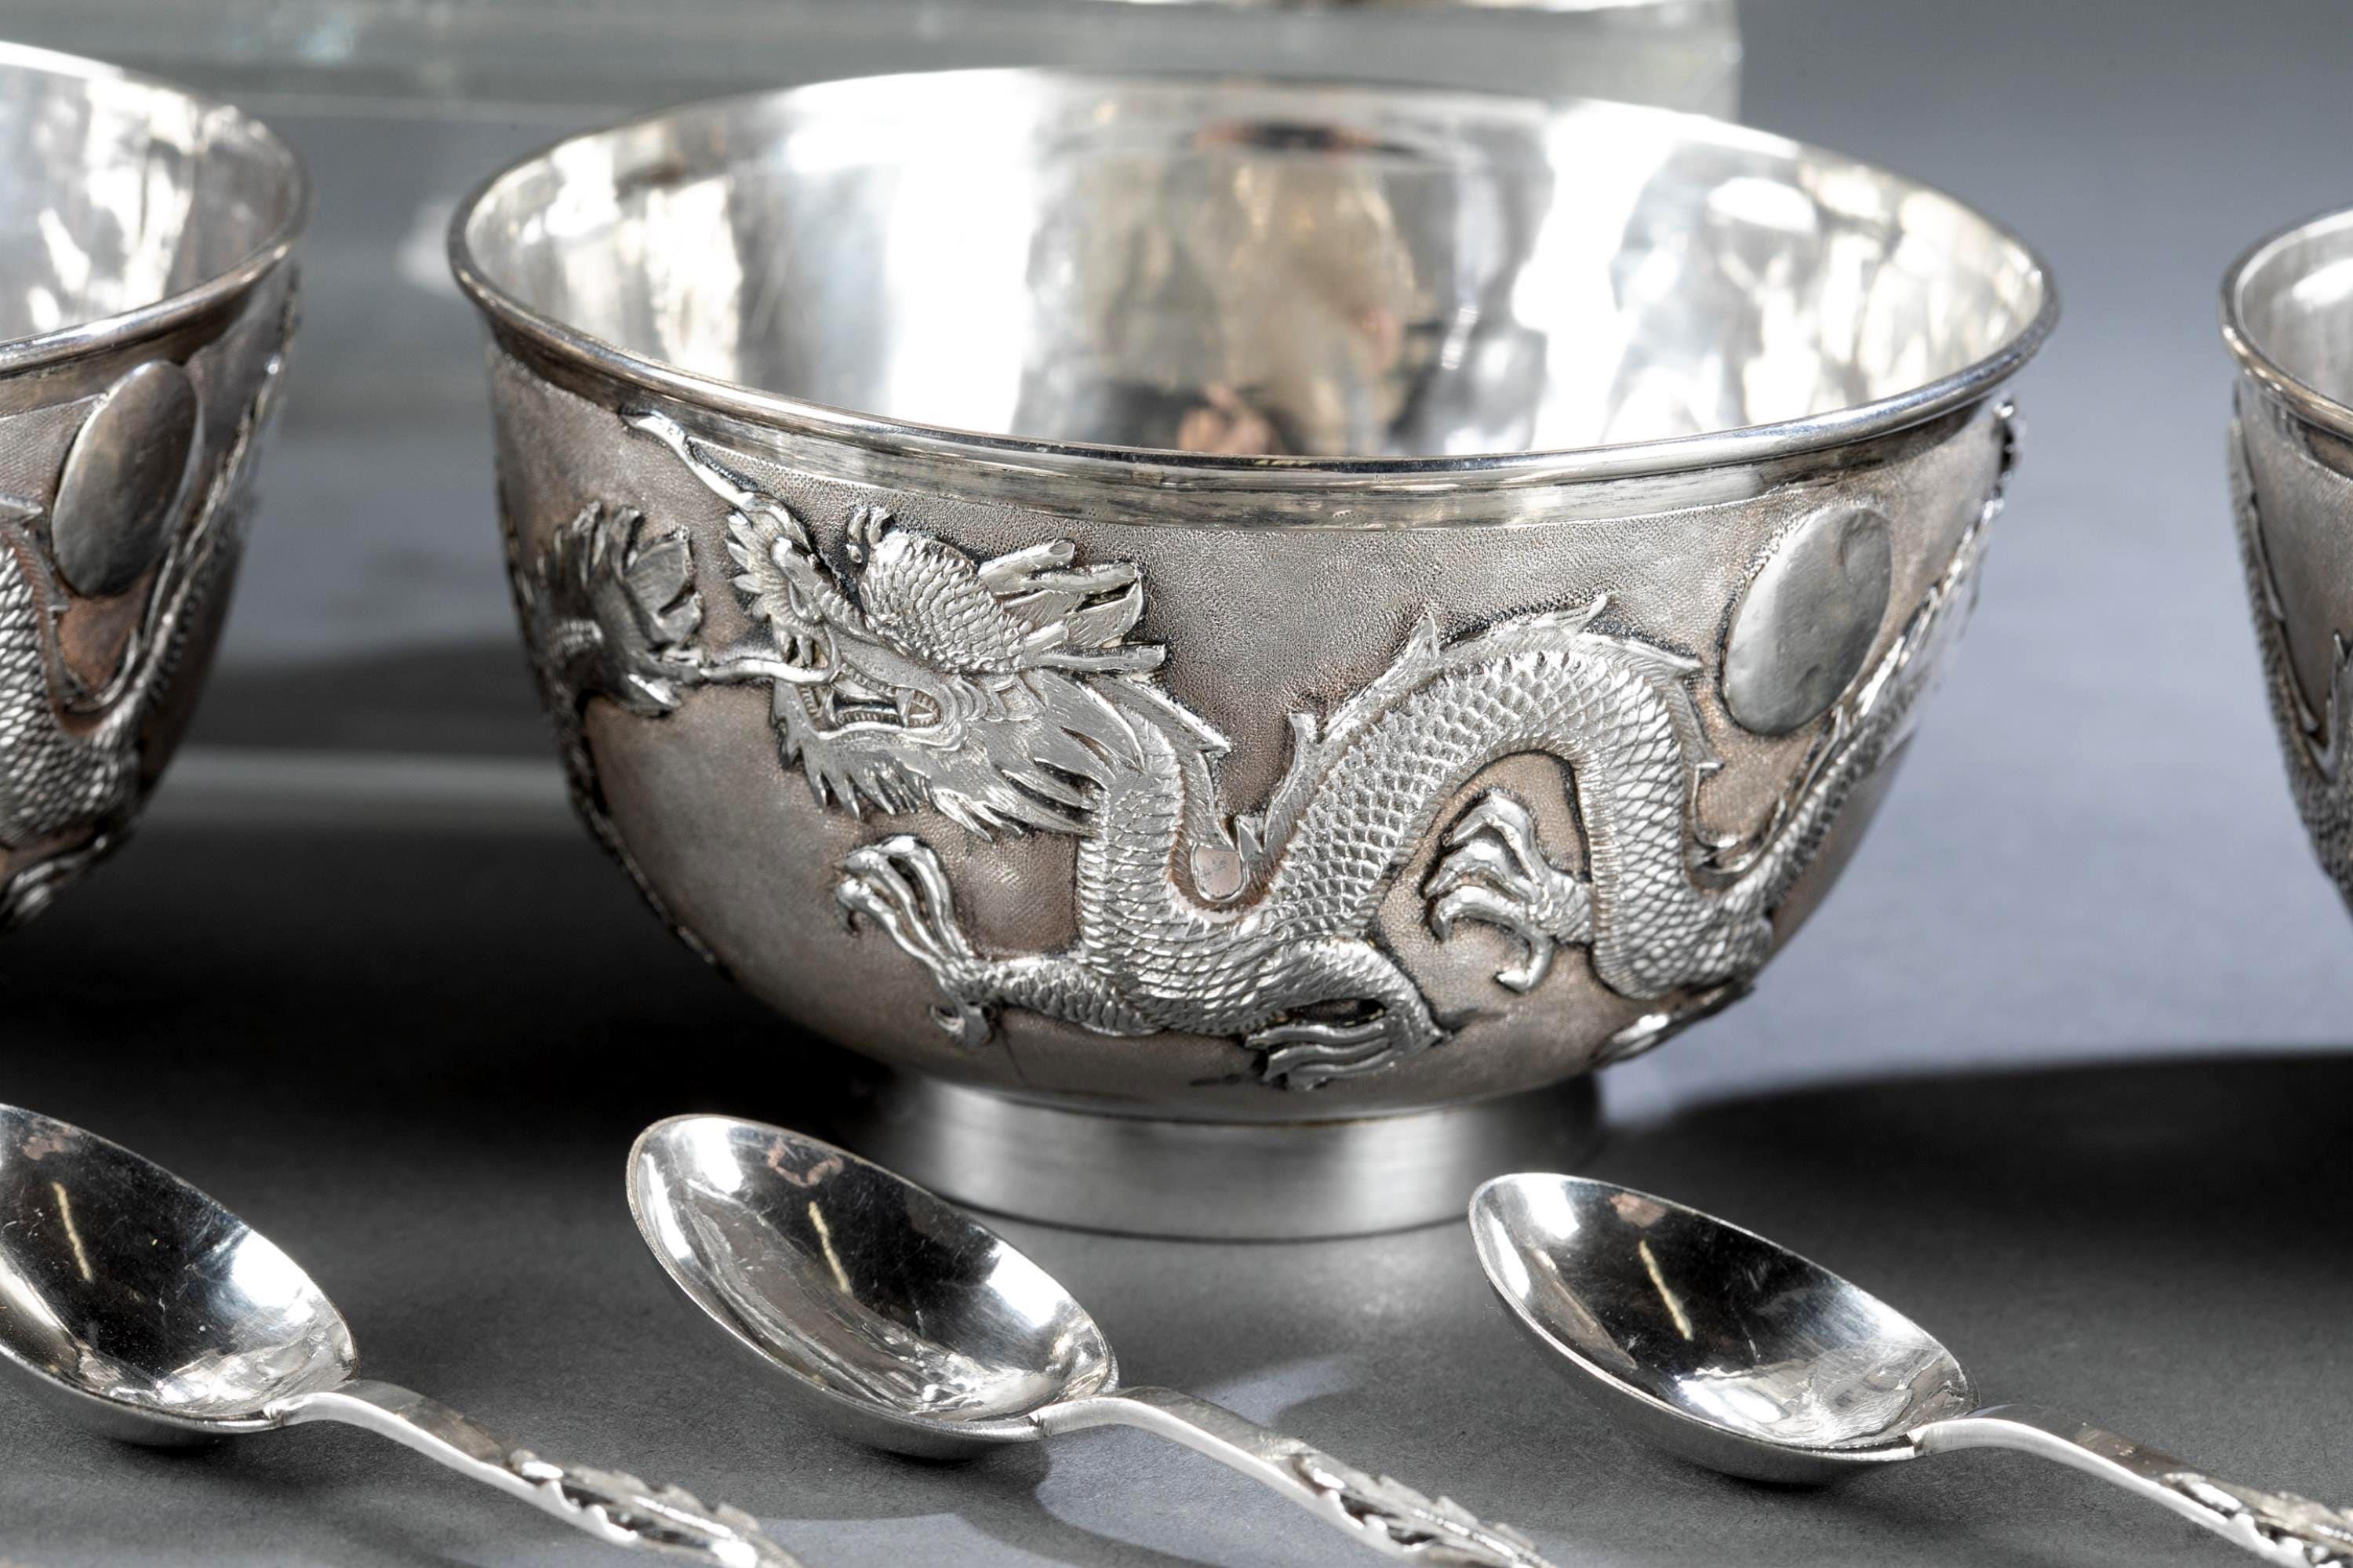 Rare Chinese Export Sterling Silver Tea Set with Dragon Design Tianjing Wuhua For Sale 9